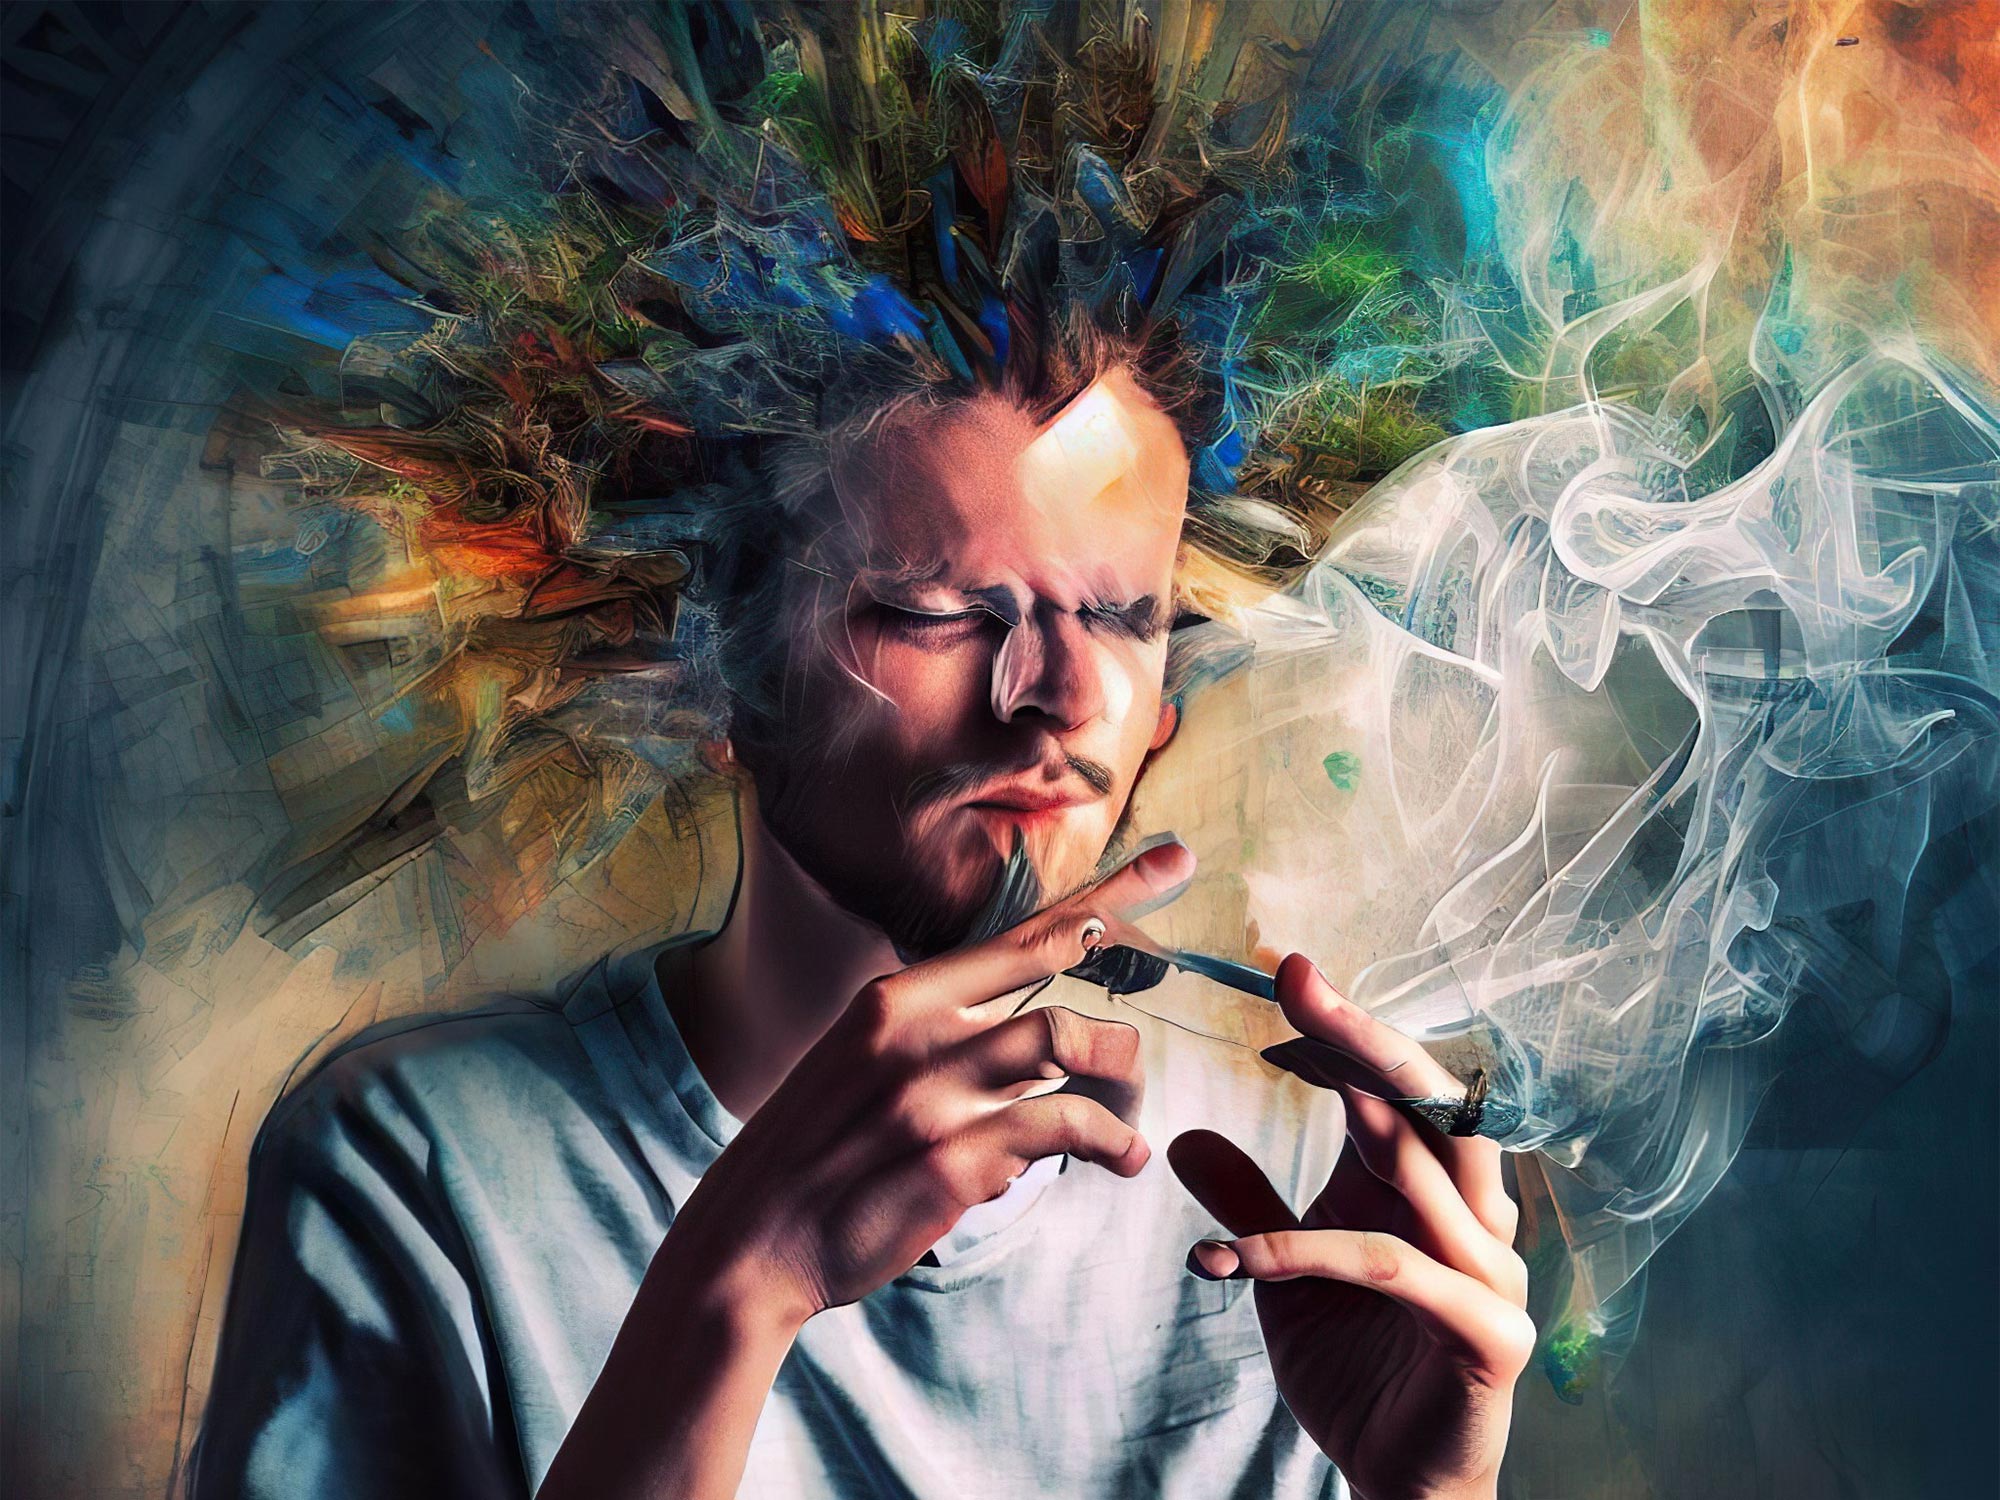 Depicting mental health of young male smoking schizophrenia